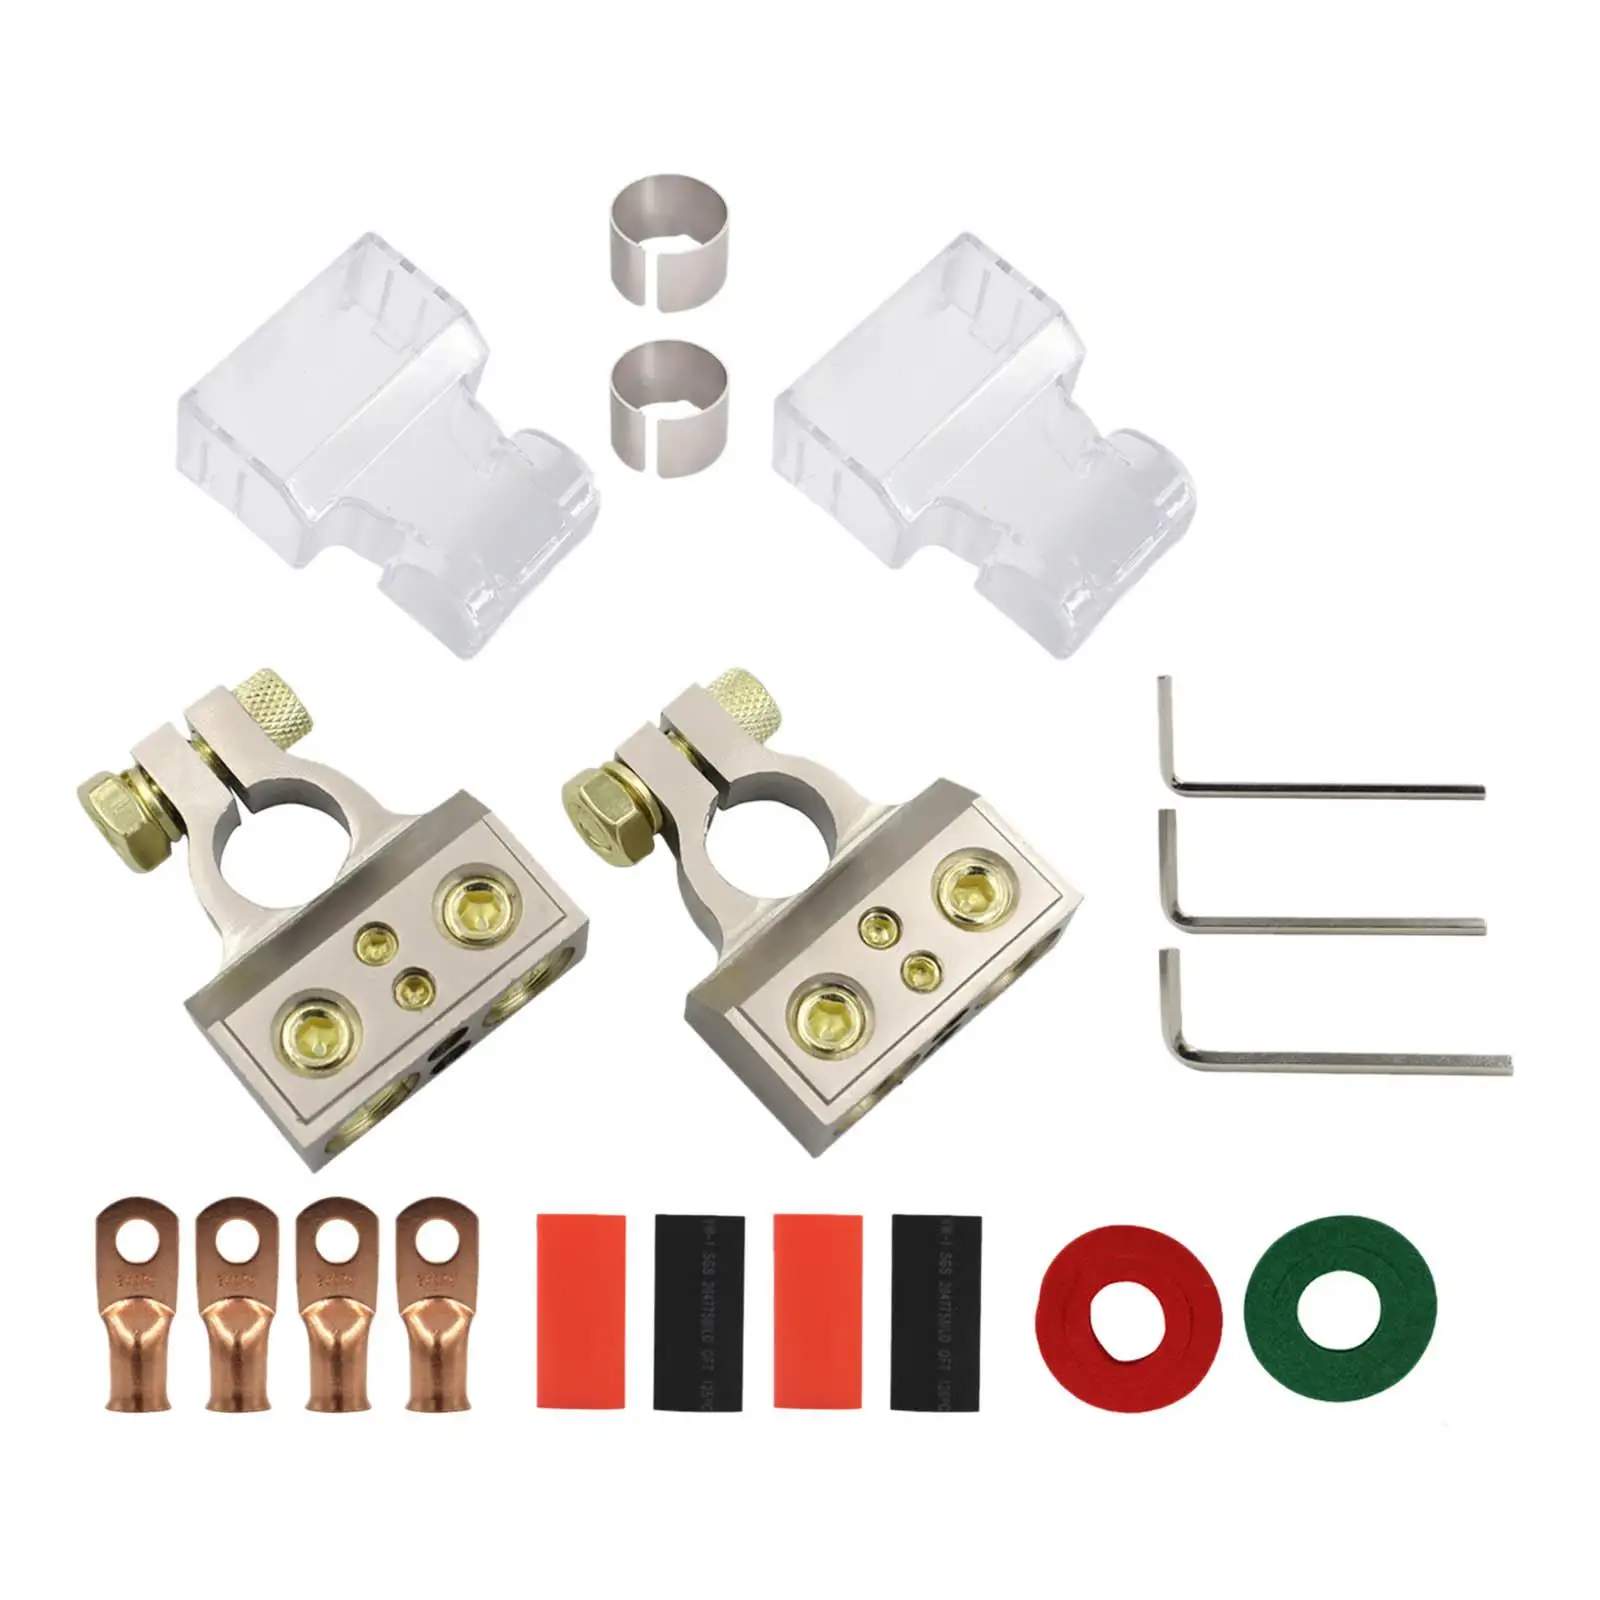 Battery Terminal Connectors with Shims Protector for Marine Truck